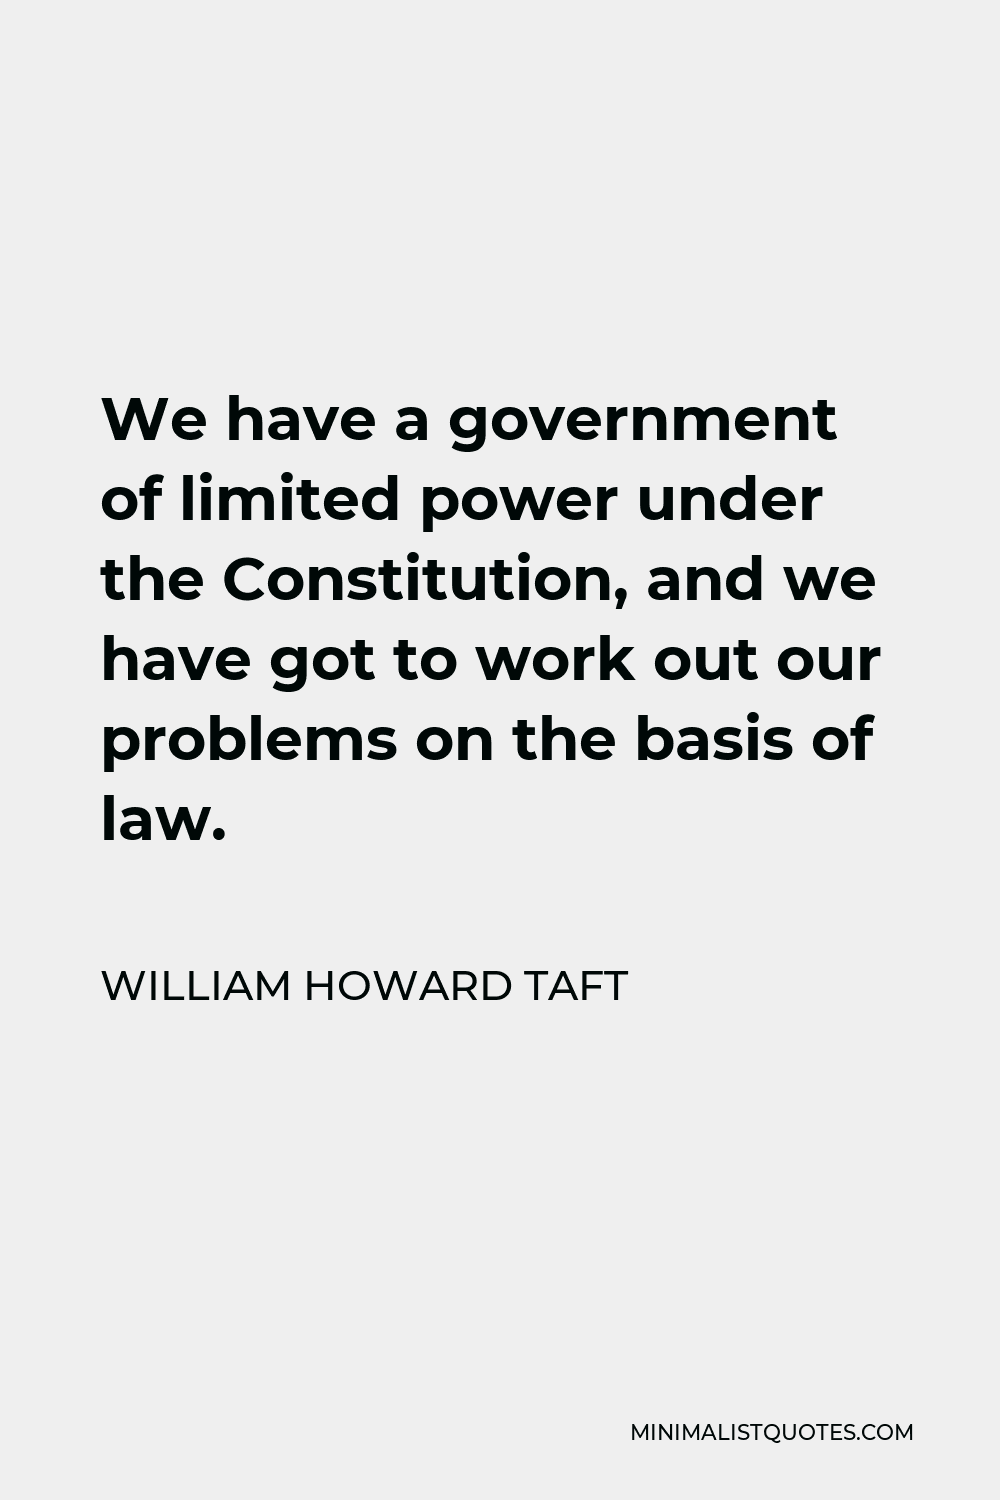 William Howard Taft Quote - We have a government of limited power under the Constitution, and we have got to work out our problems on the basis of law.